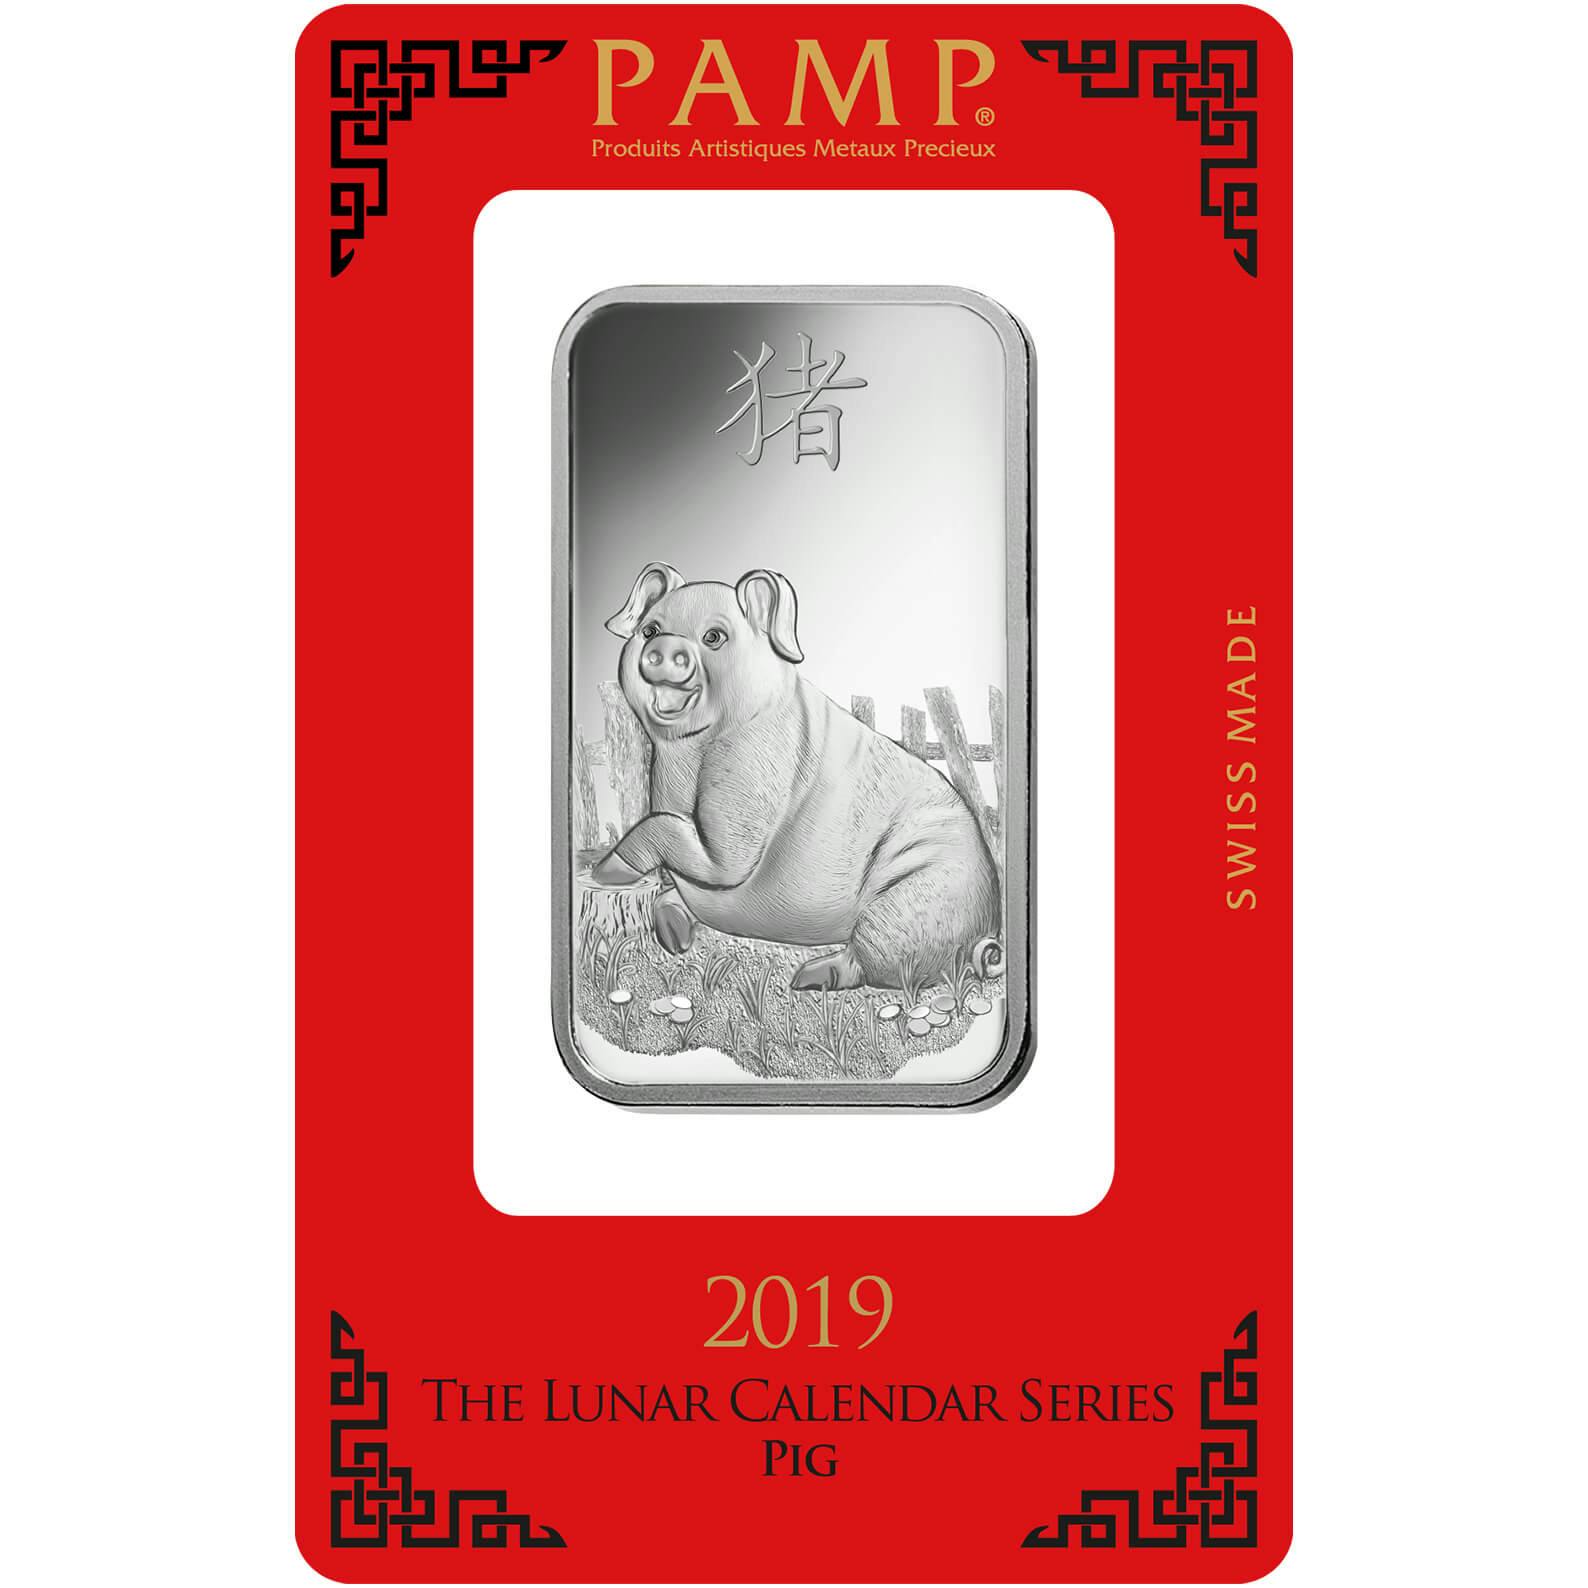 Invest in 1 oz Fine Silver Lunar Pig - PAMP Swiss - Pack Front